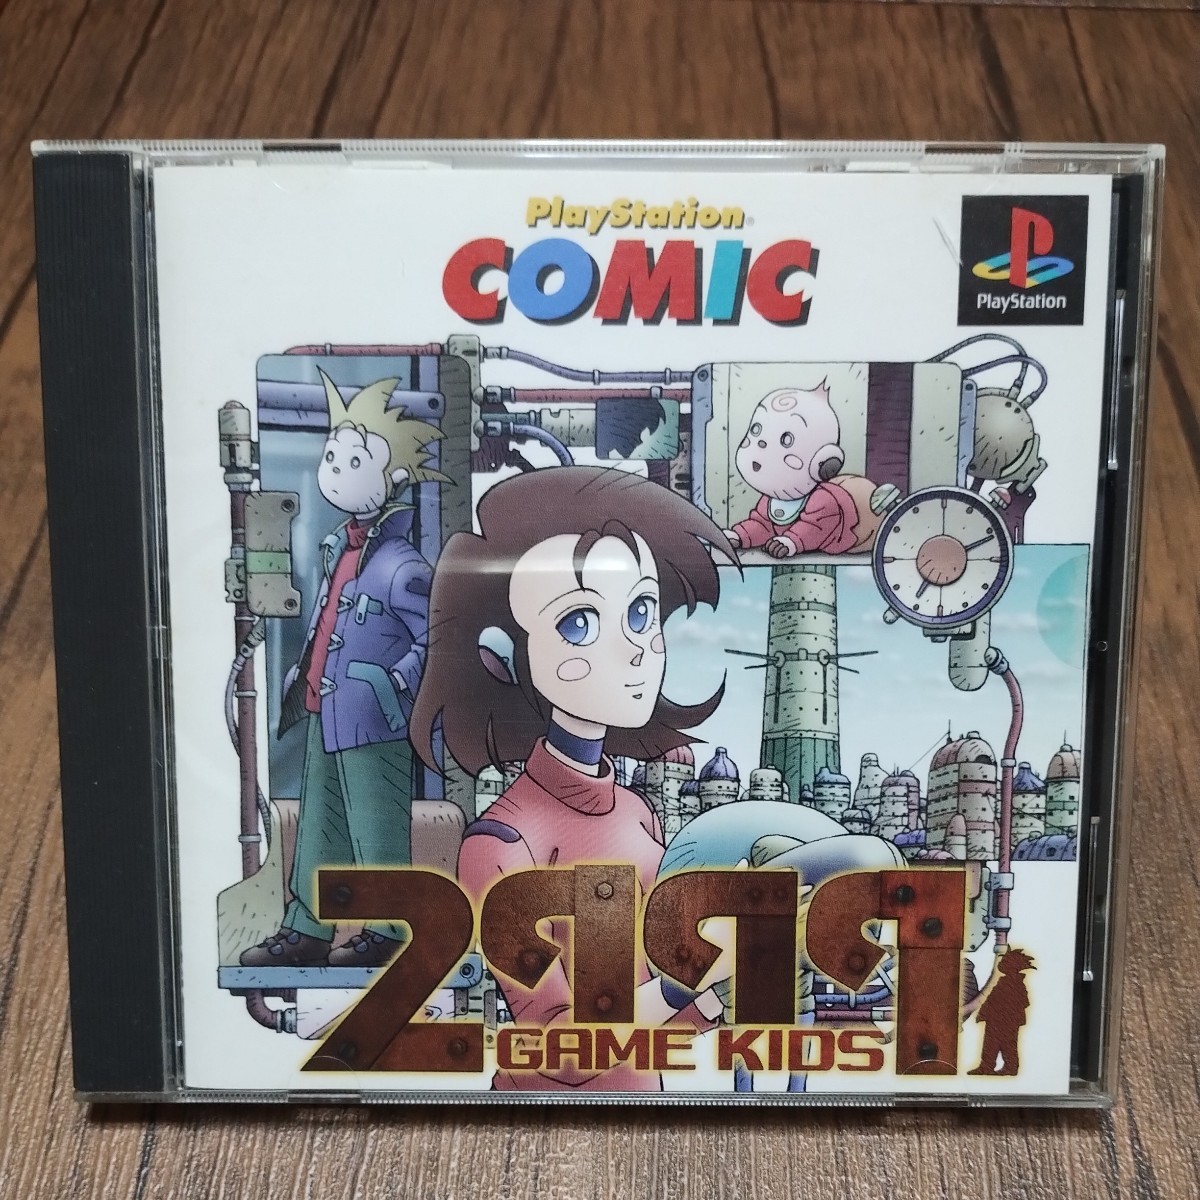 PlayStation プレイステーション プレステ PS1 PS ソフト 中古 2999年のゲームキッズ ソニー SCE PlayStationCOMIC アナログ対応 管zの画像1